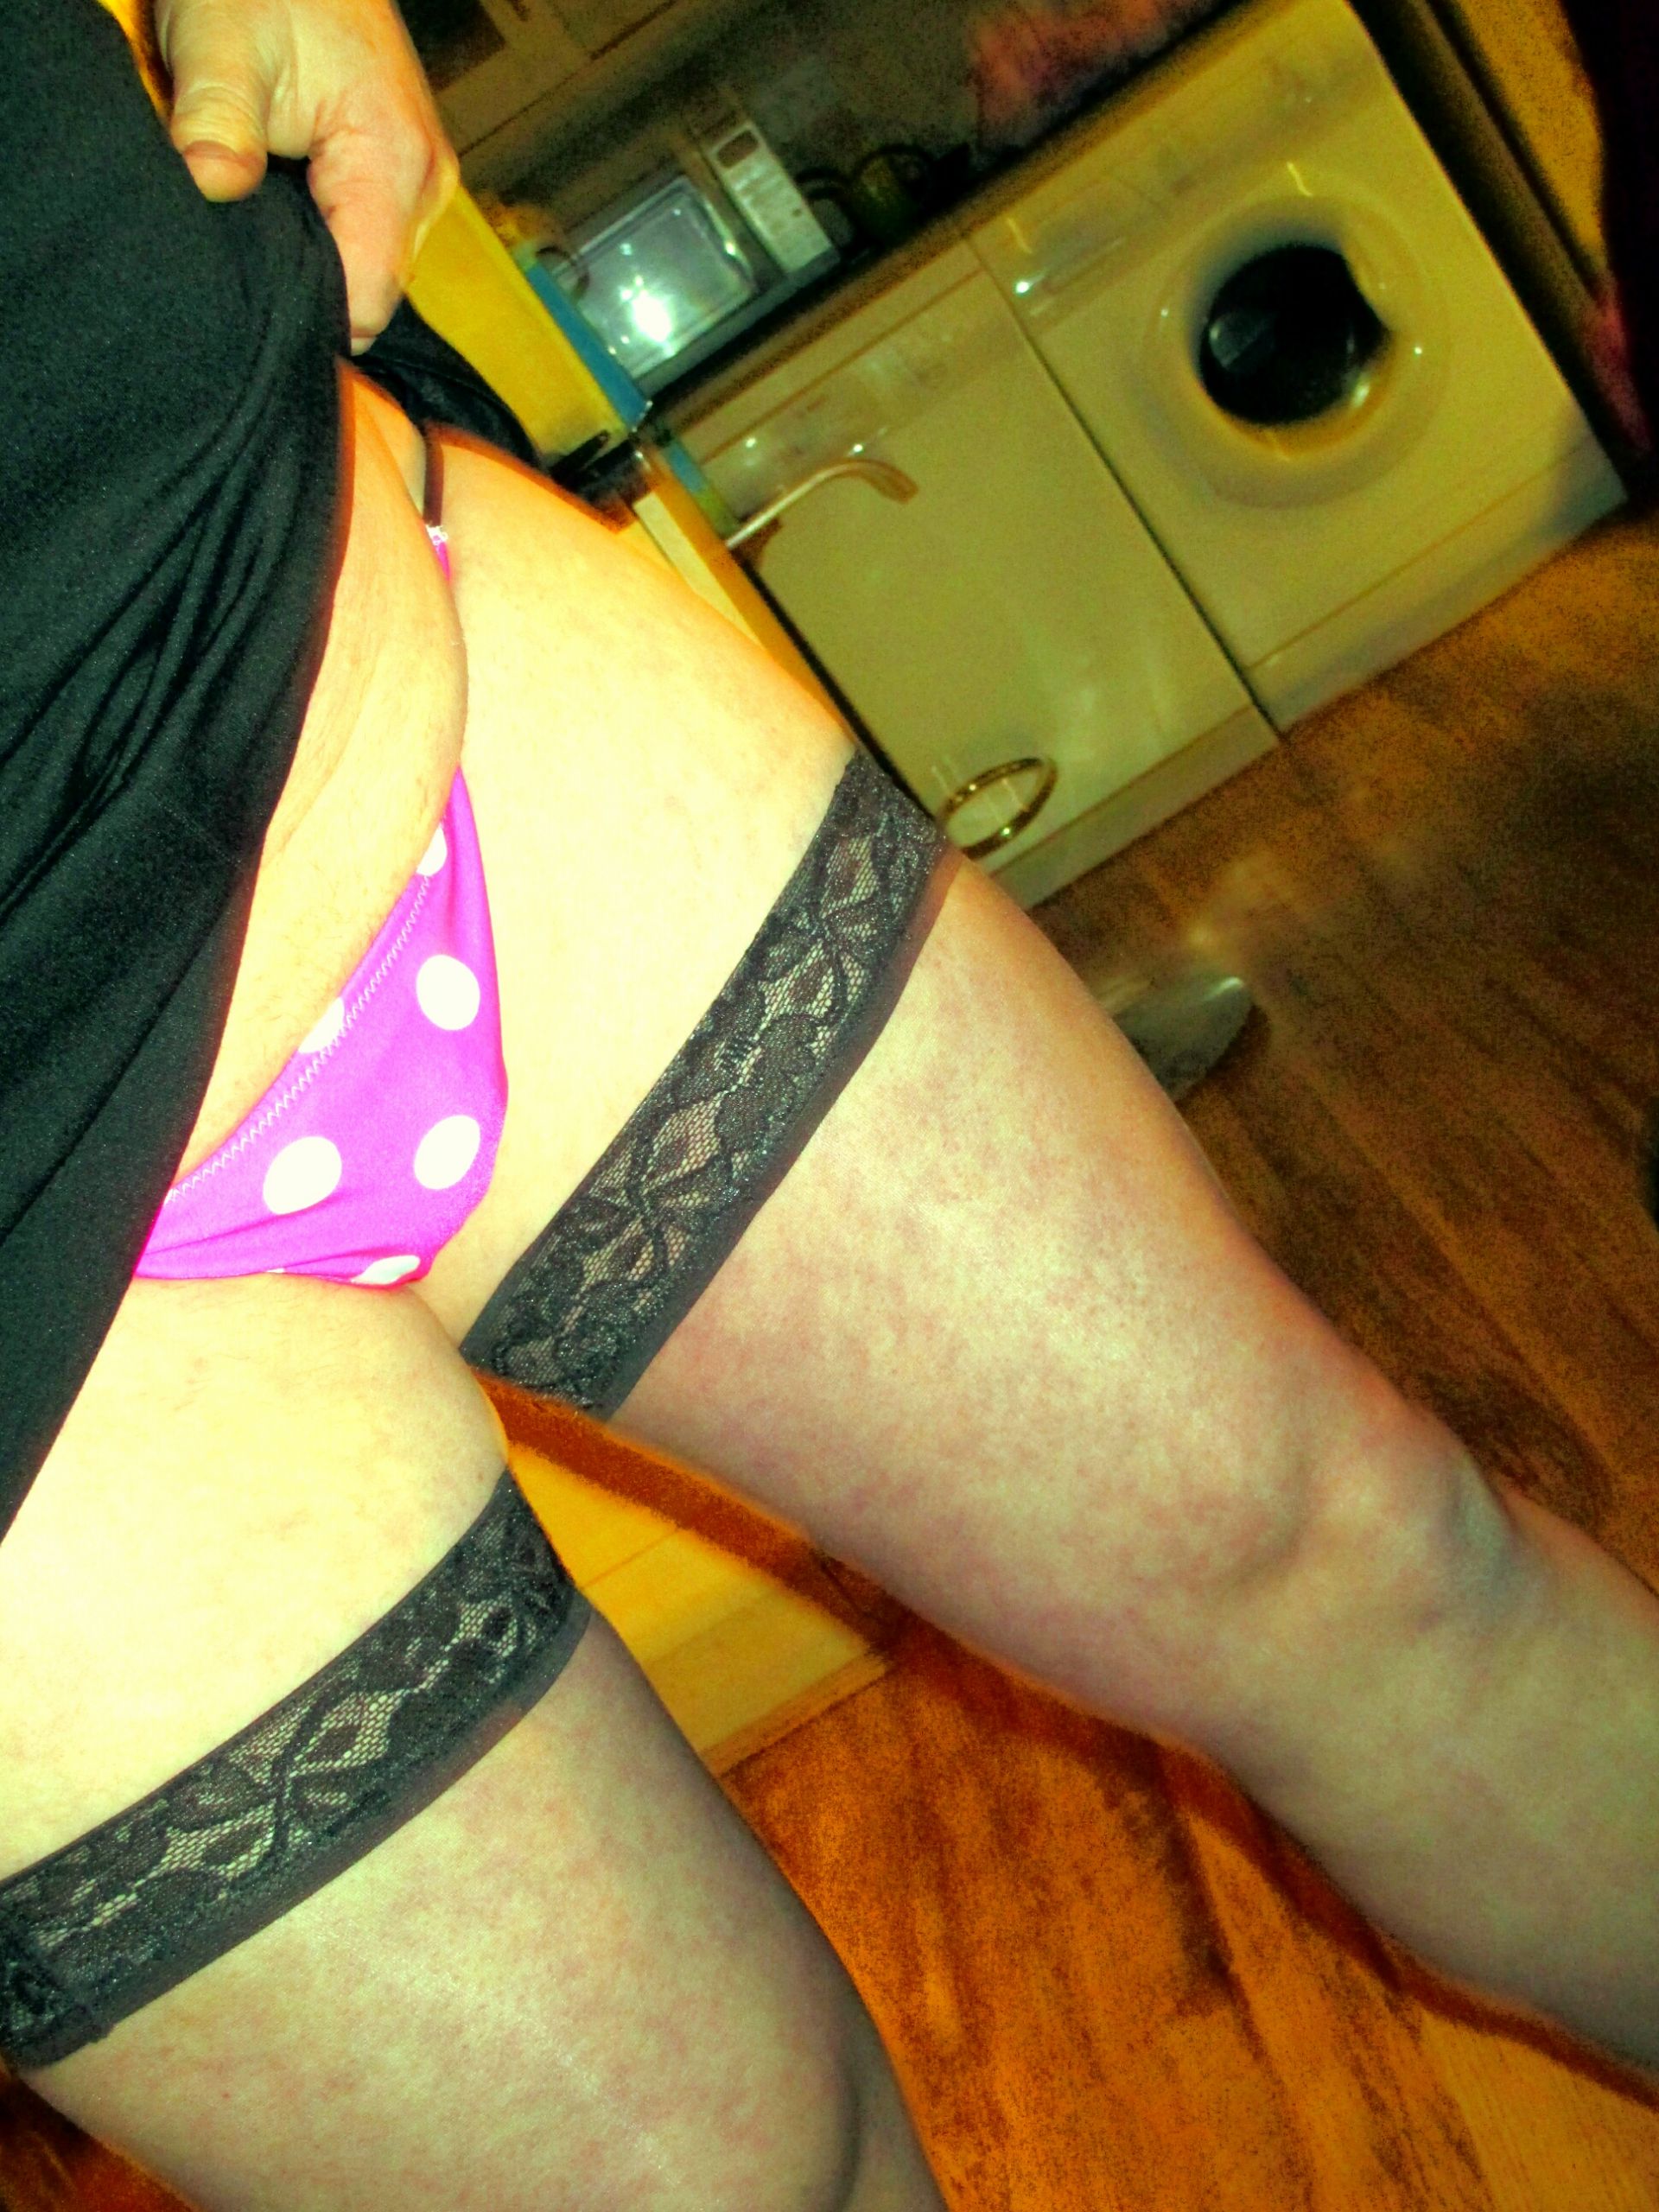 Love these tiny little knickers